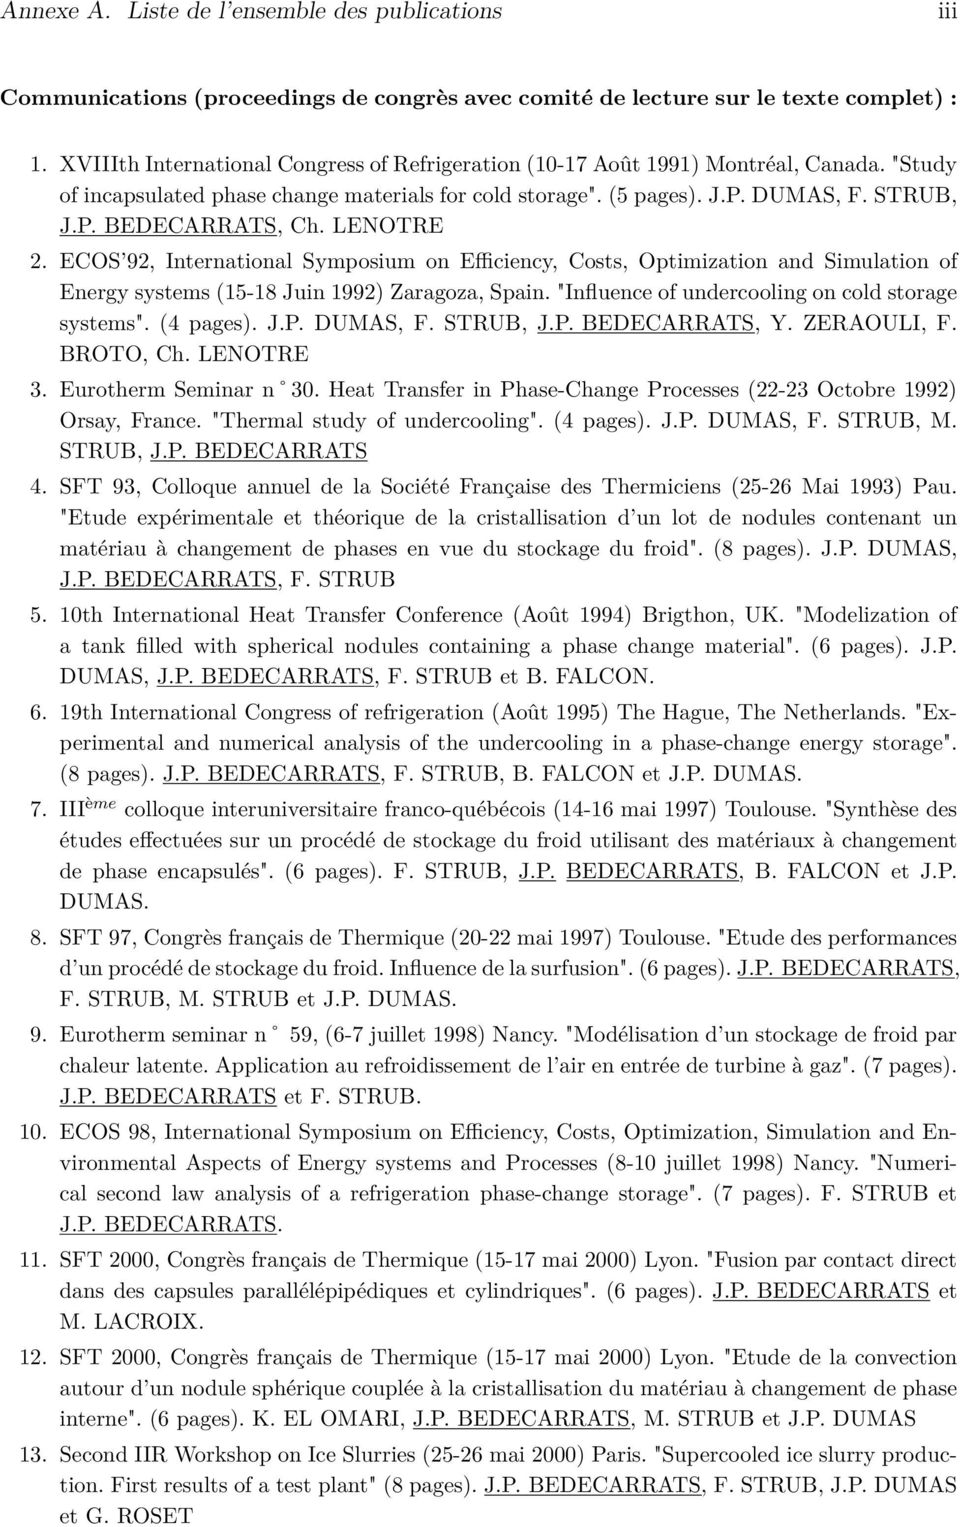 ECOS 92, International Symposium on Efficiency, Costs, Optimization and Simulation of Energy systems (15-18 Juin 1992) Zaragoza, Spain. "Influence of undercooling on cold storage systems". (4 pages).